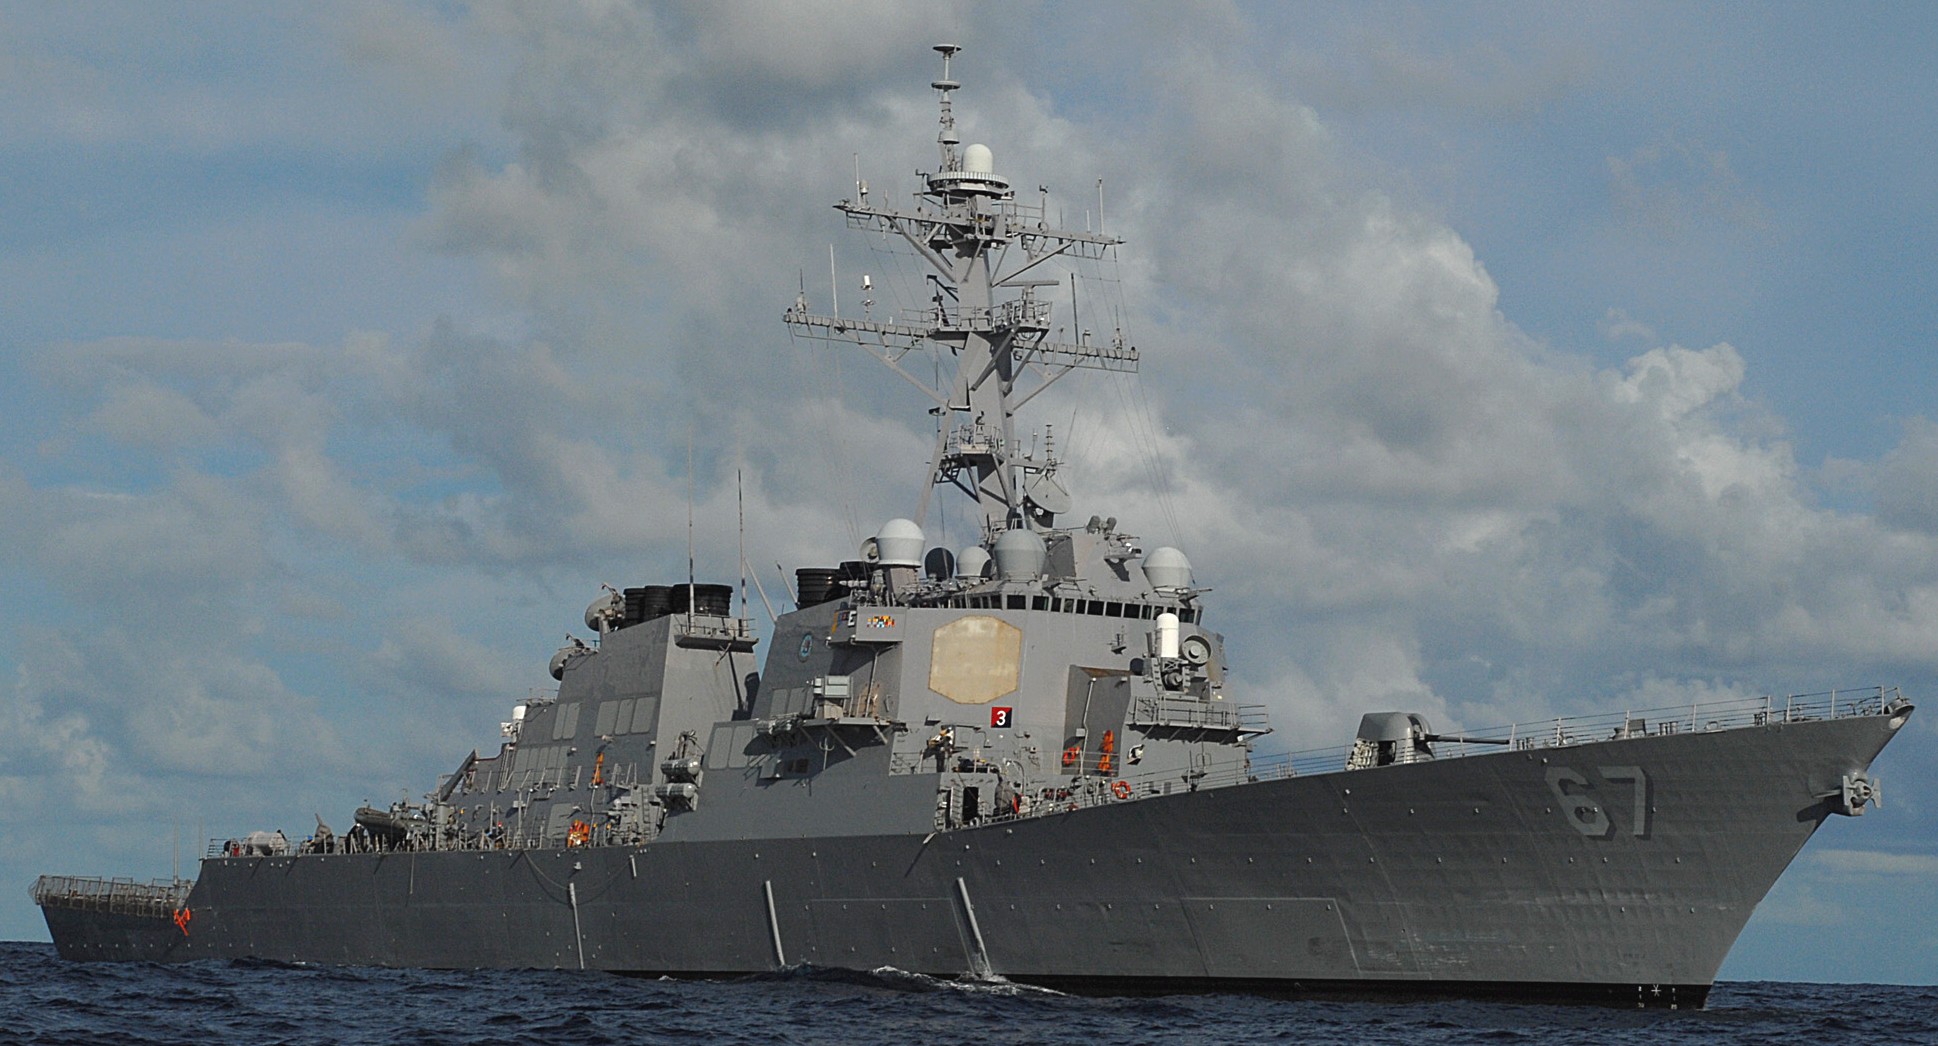 ddg-67 uss cole guided missile destroyer arleigh burke class navy aegis 30